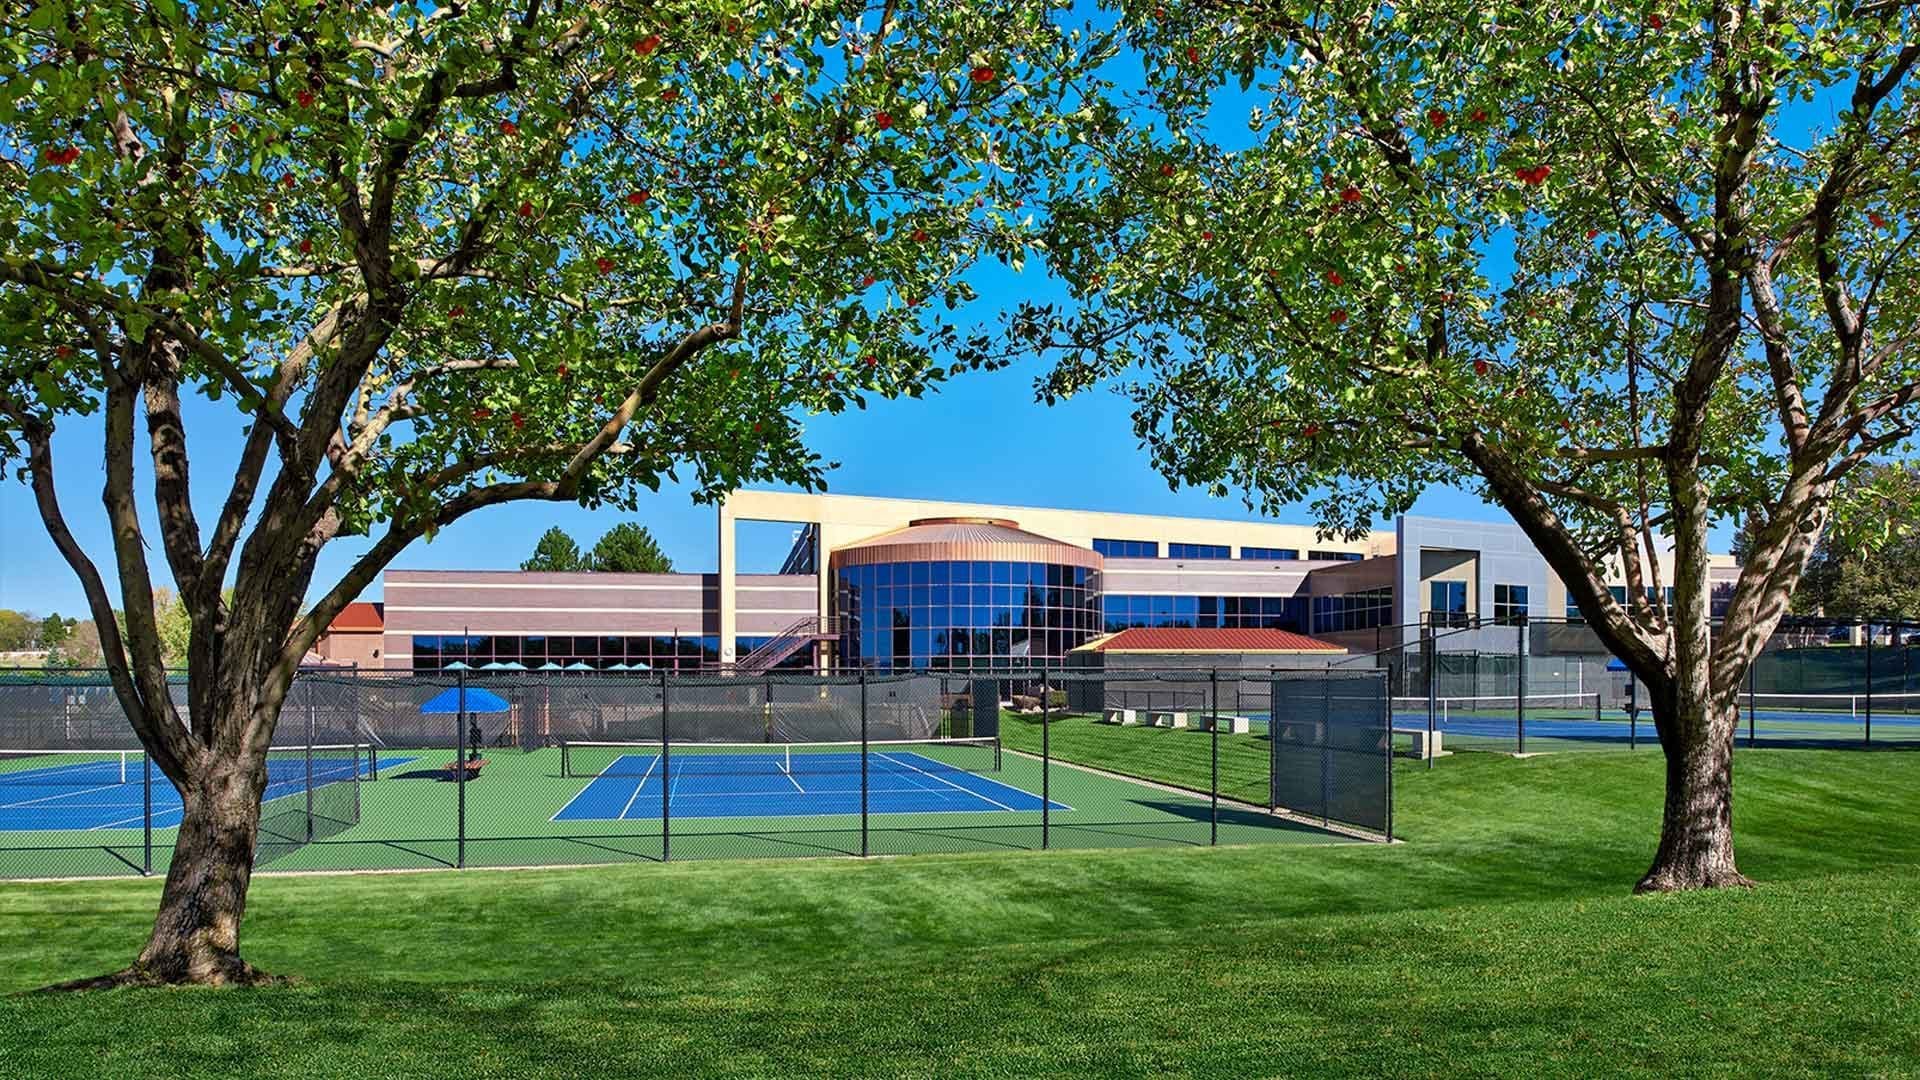 club greenwood facility and tennis courts in summertime